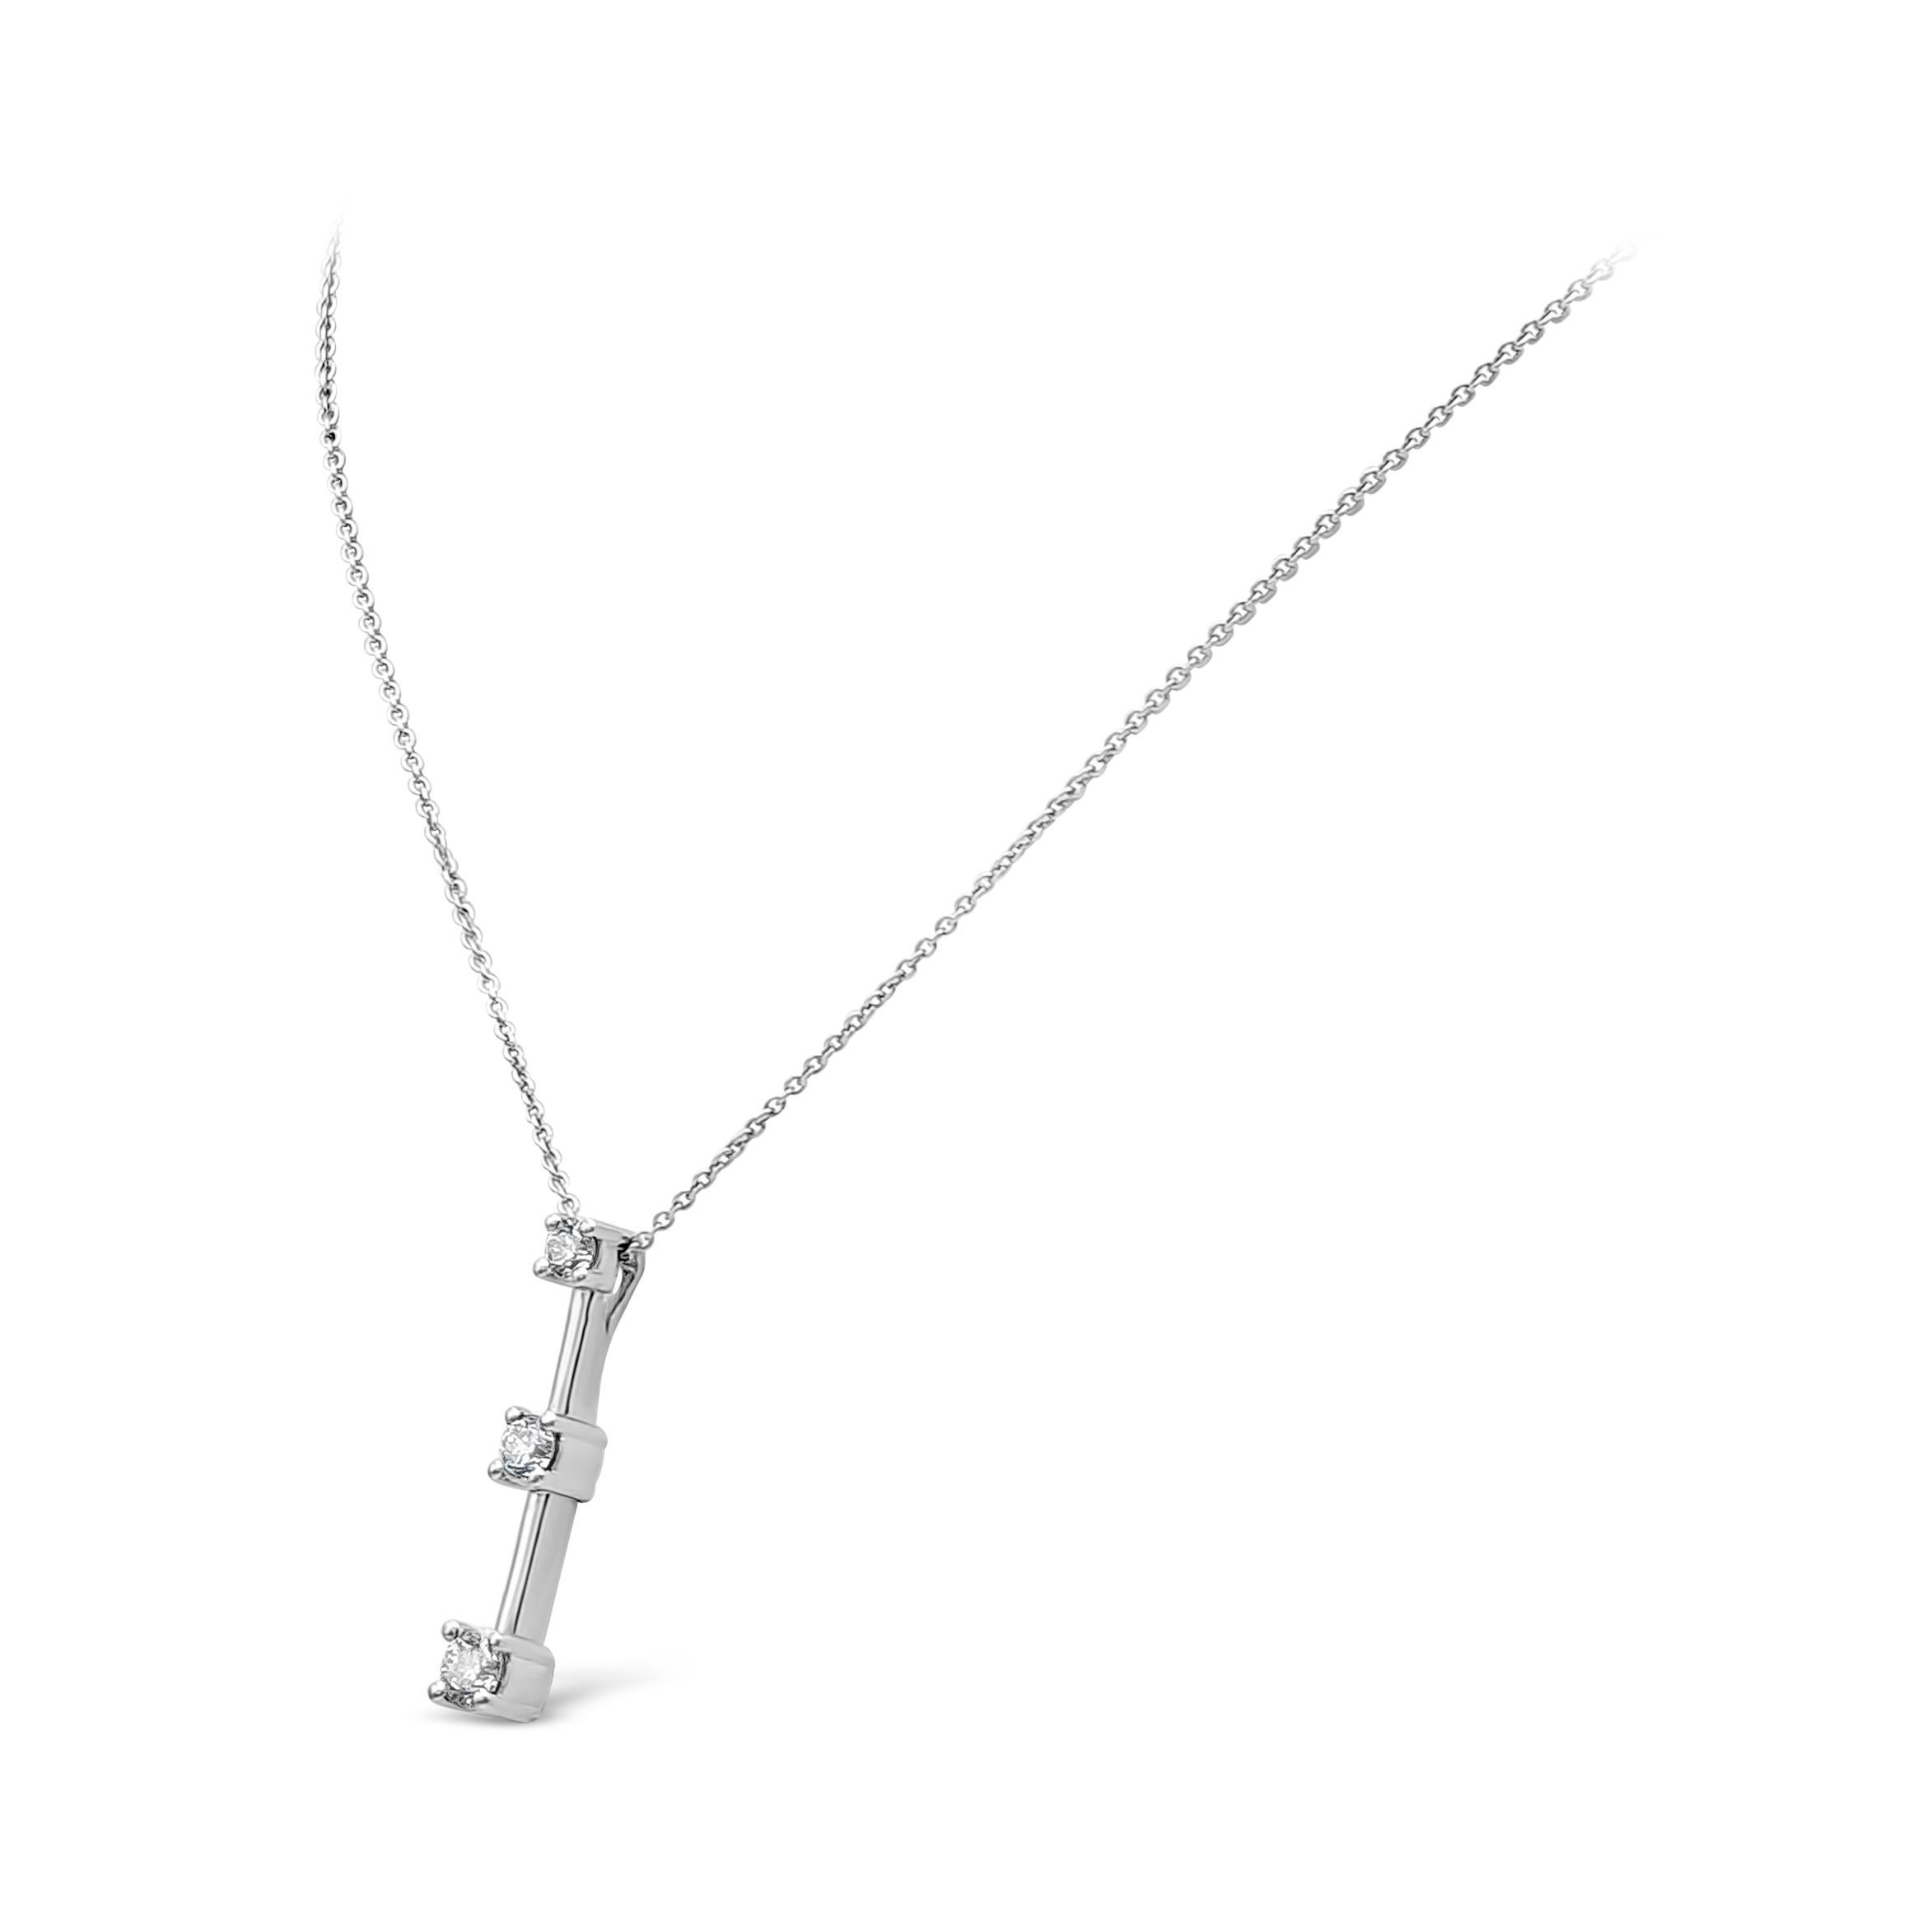 A simple modern drop pendant necklace showcasing three dazzling brilliant round diamonds weighing 0.67 carat total, G in Color and VS-SI in Clarity. Set in a classic 4 prong setting. Made with 18K White Gold, 14k chain 18 inches in Length. 

Style